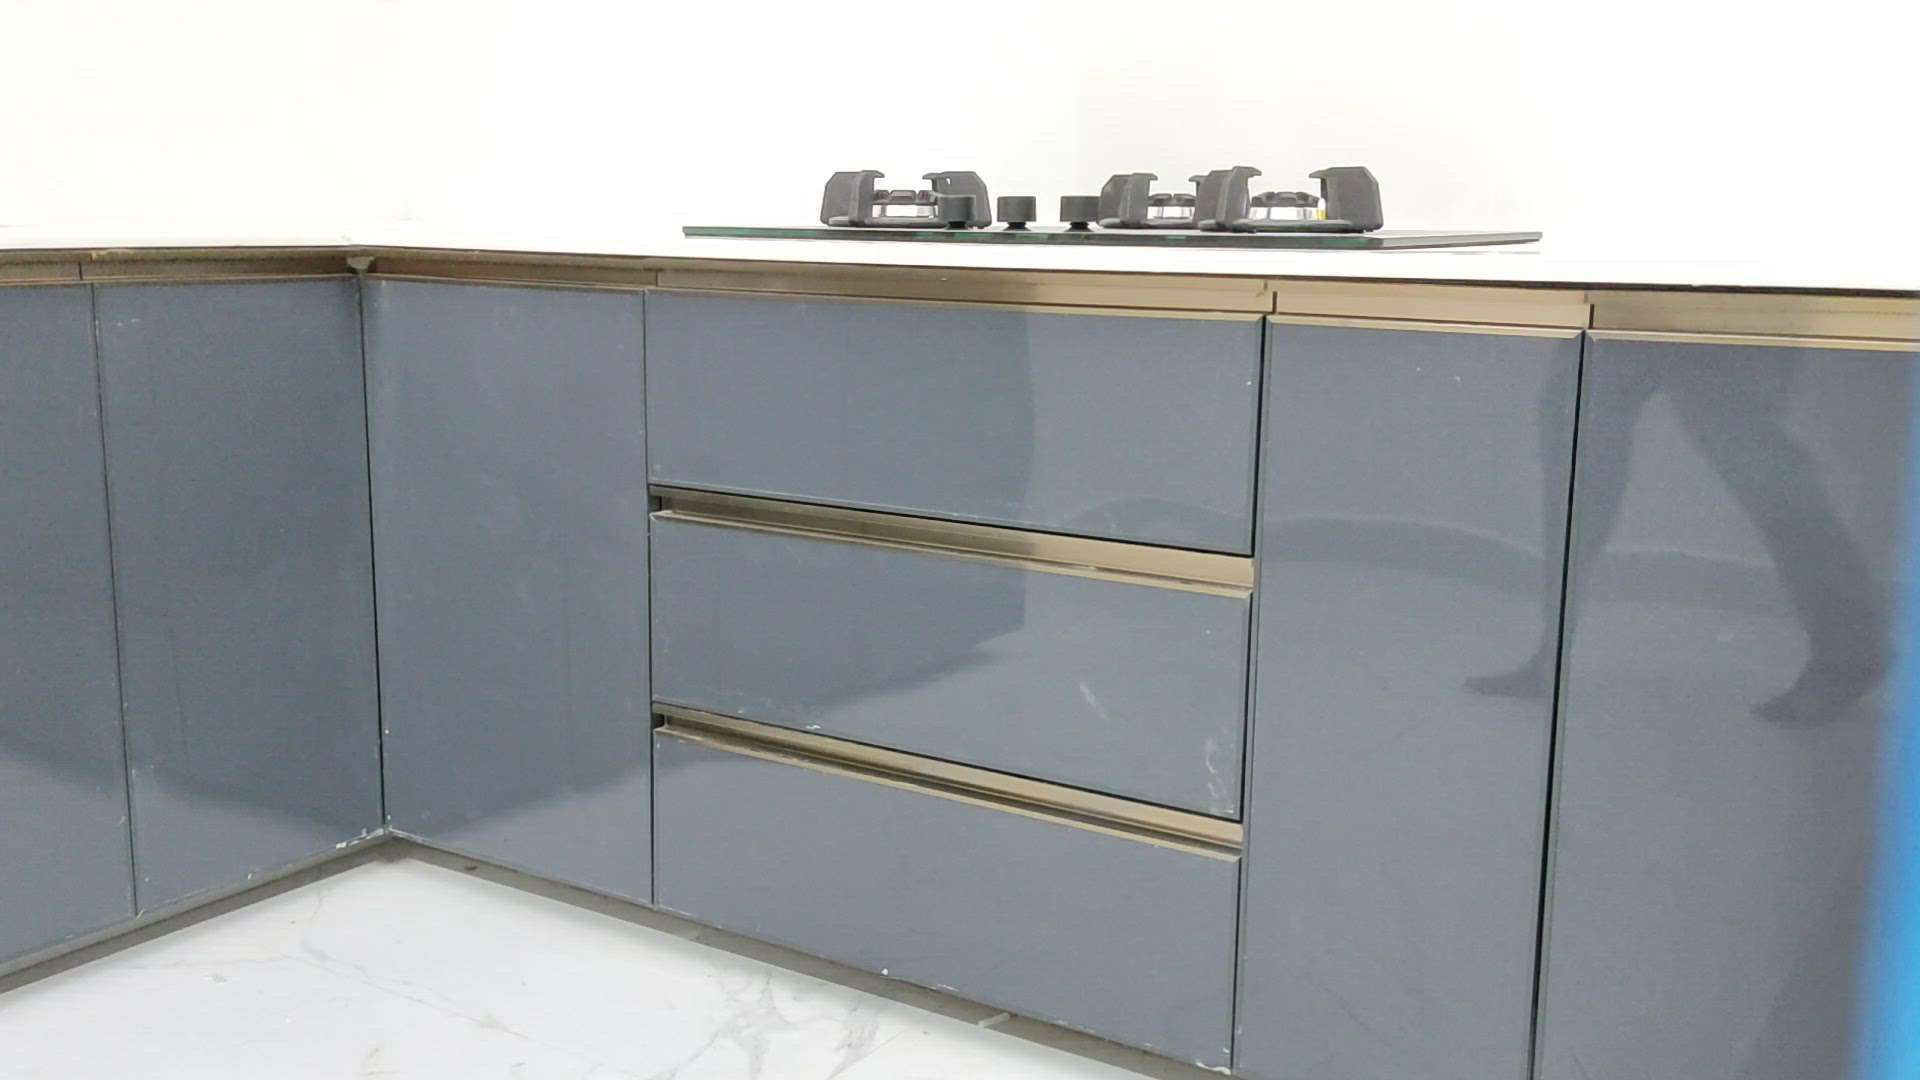 #KitchenCabinet with #tandembox